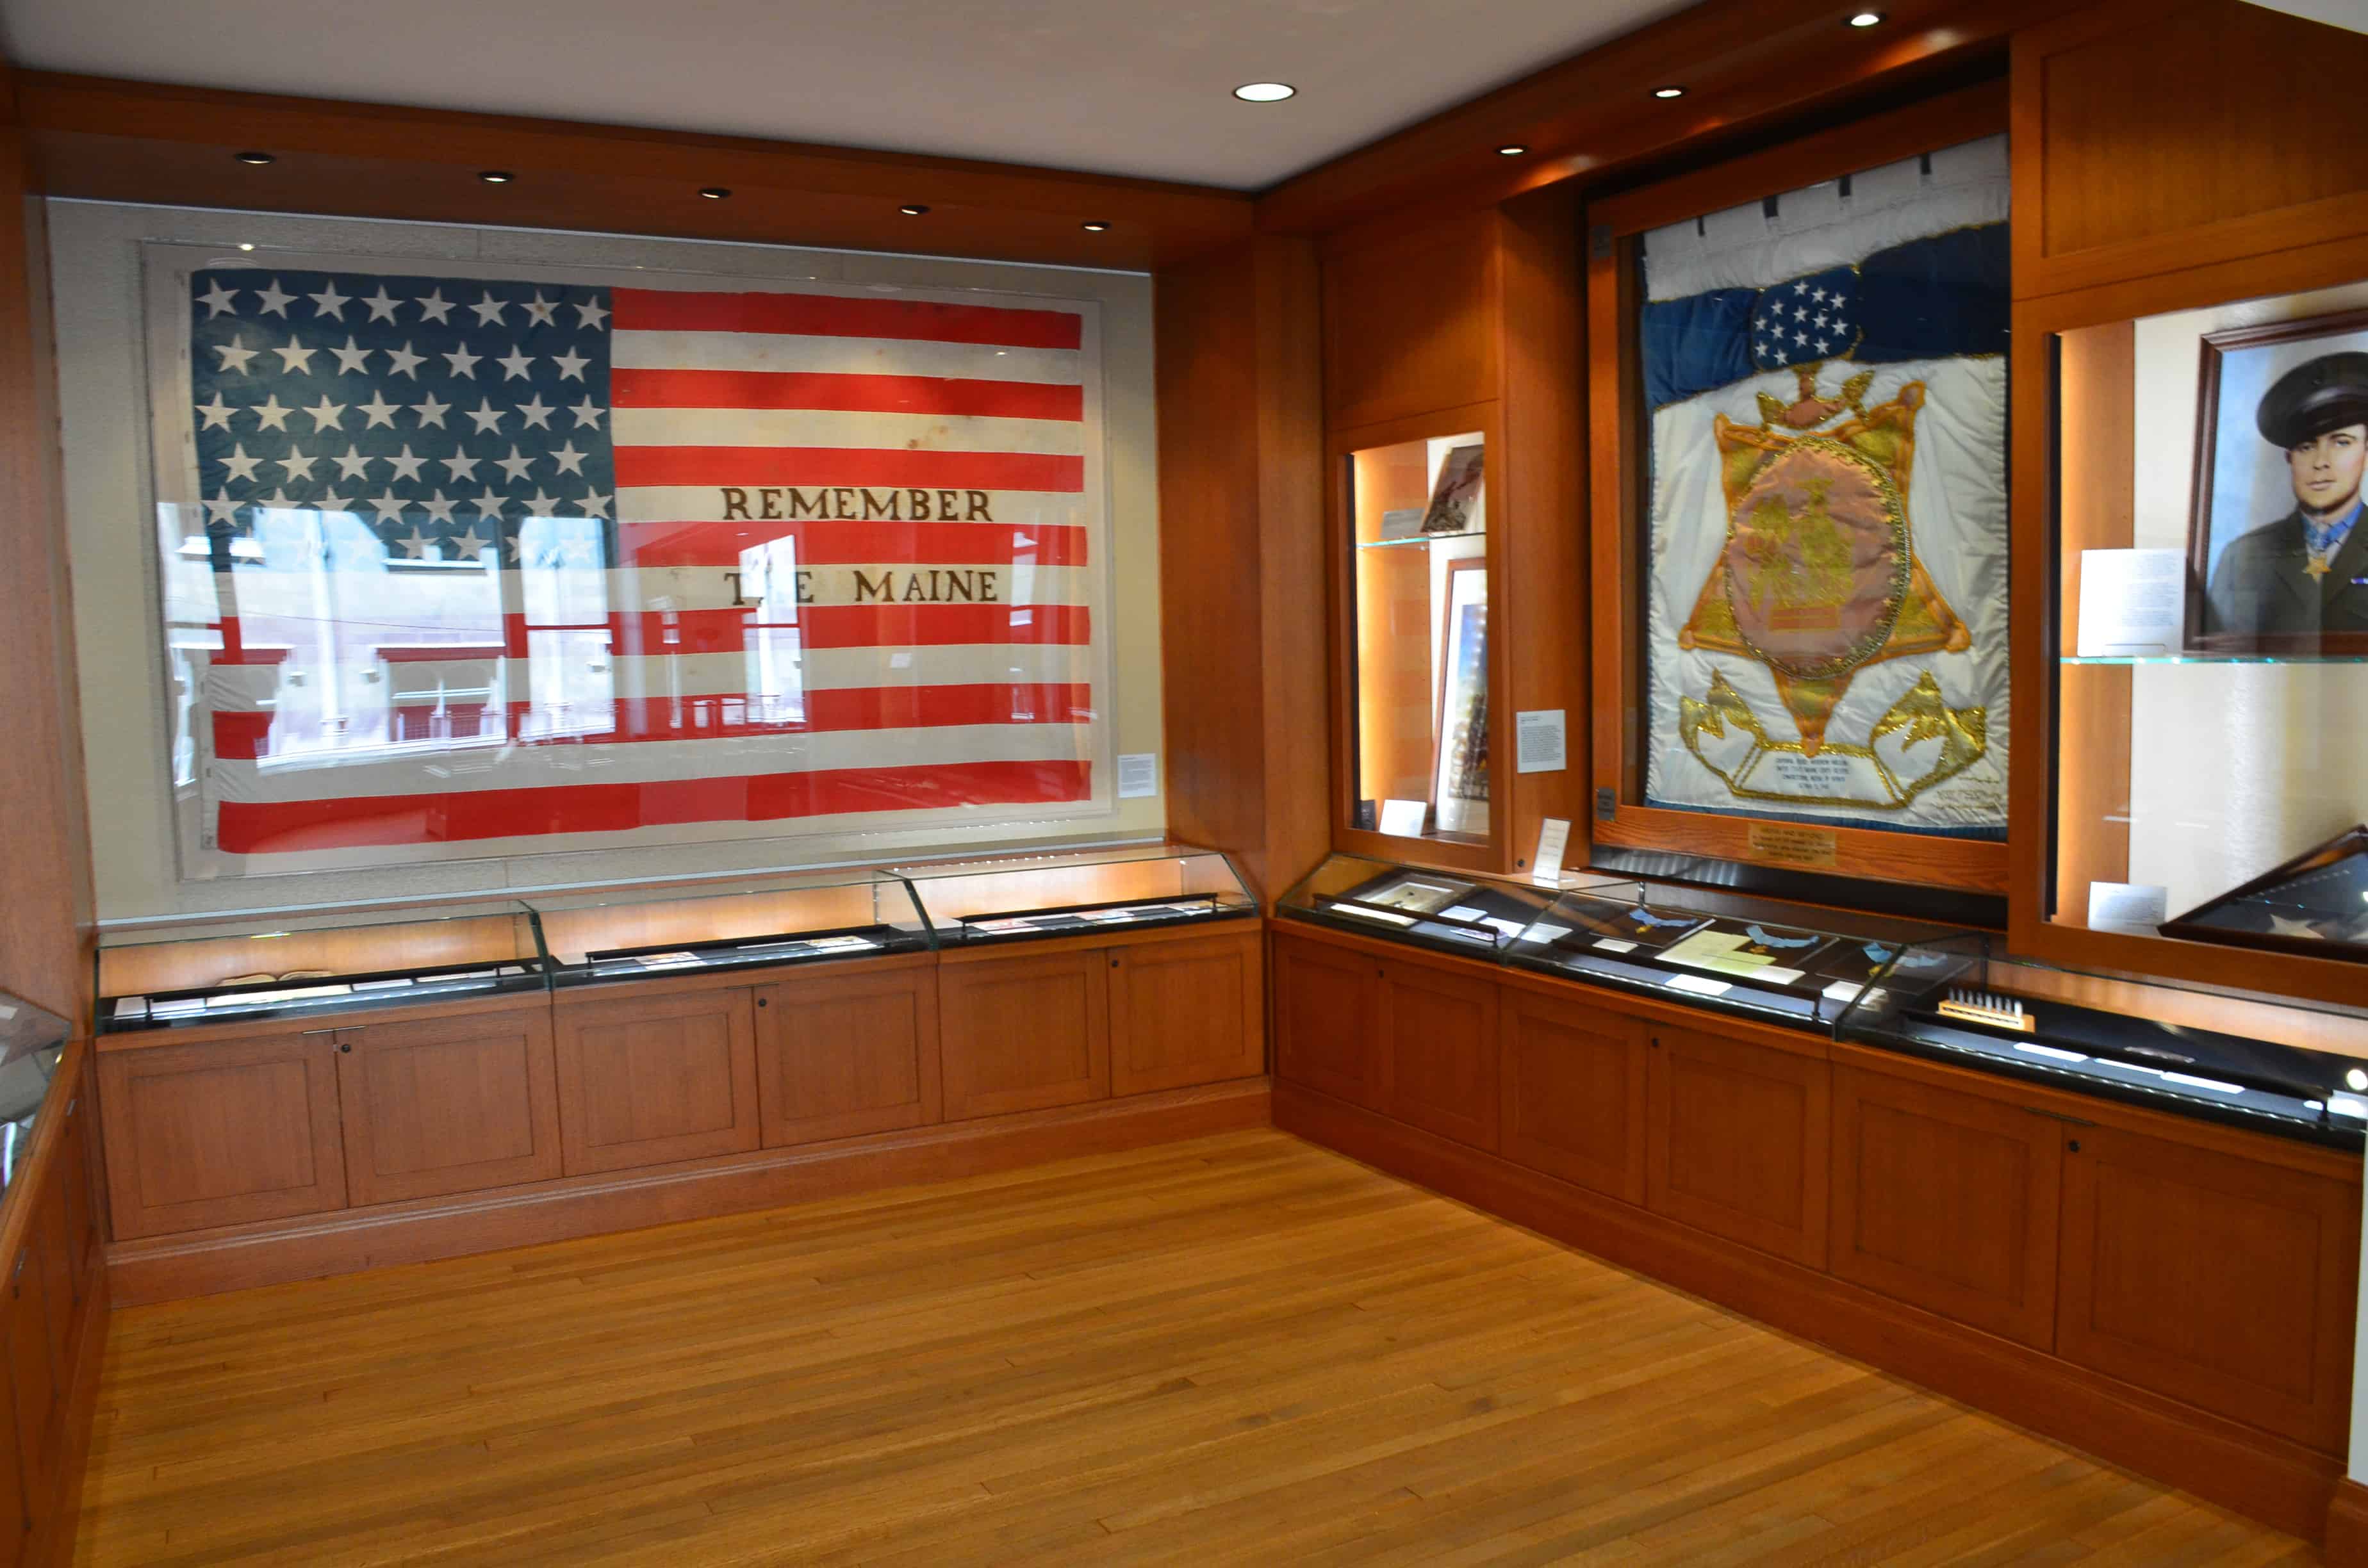 Pritzker Military Museum in Chicago, Illinois